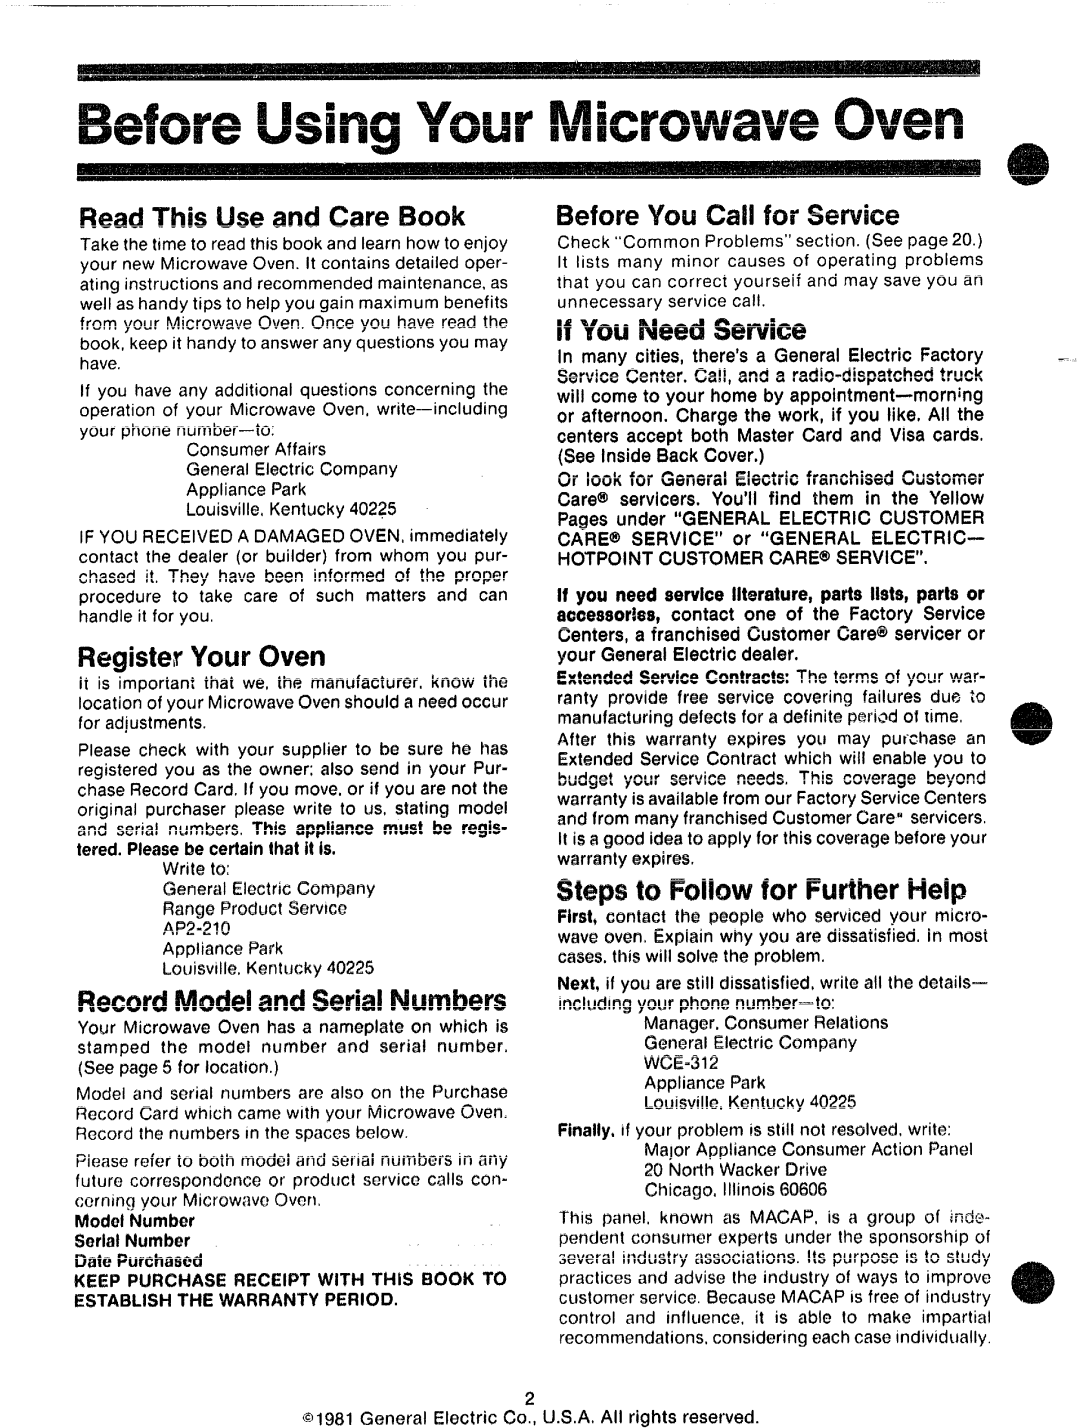 GE 49-4491 ReadThis Use and Care Book, RegisterYour km, Record, BeforeYou Cdl for Service, If ‘YOLUNeed Service, WCE=312 